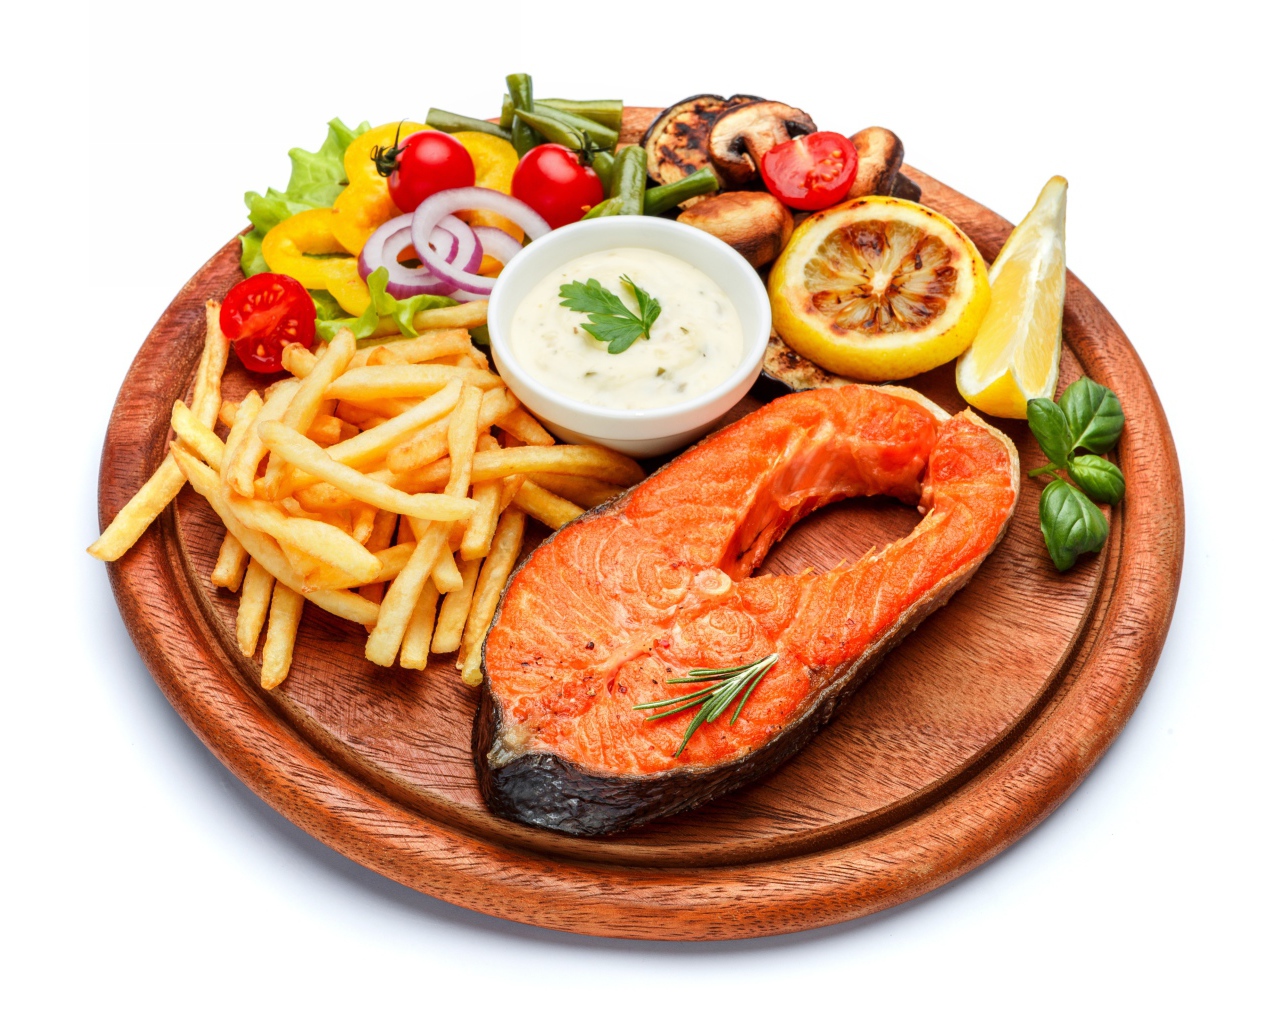 Fish on a board with french fries, vegetables and sauce